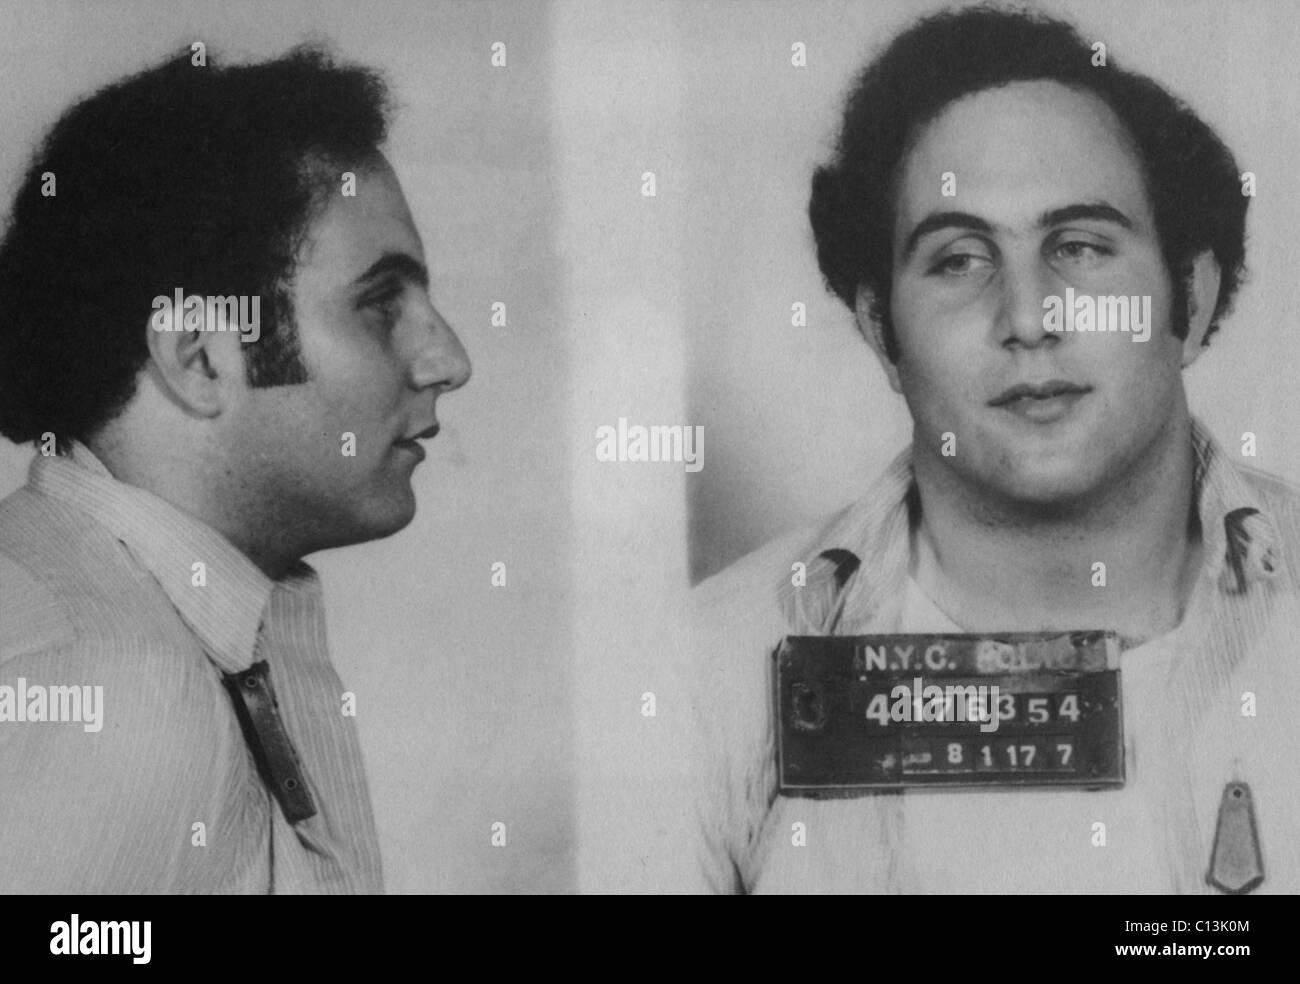 David Berkowitz (b. 1953) killed six people and wounded seven others in the course of eight shootings in New York between 1976 and 1977. Berkowitz was played by Michael Badalucco in Spike Lee's 1999 film, SUMMER OF SAM. Stock Photo